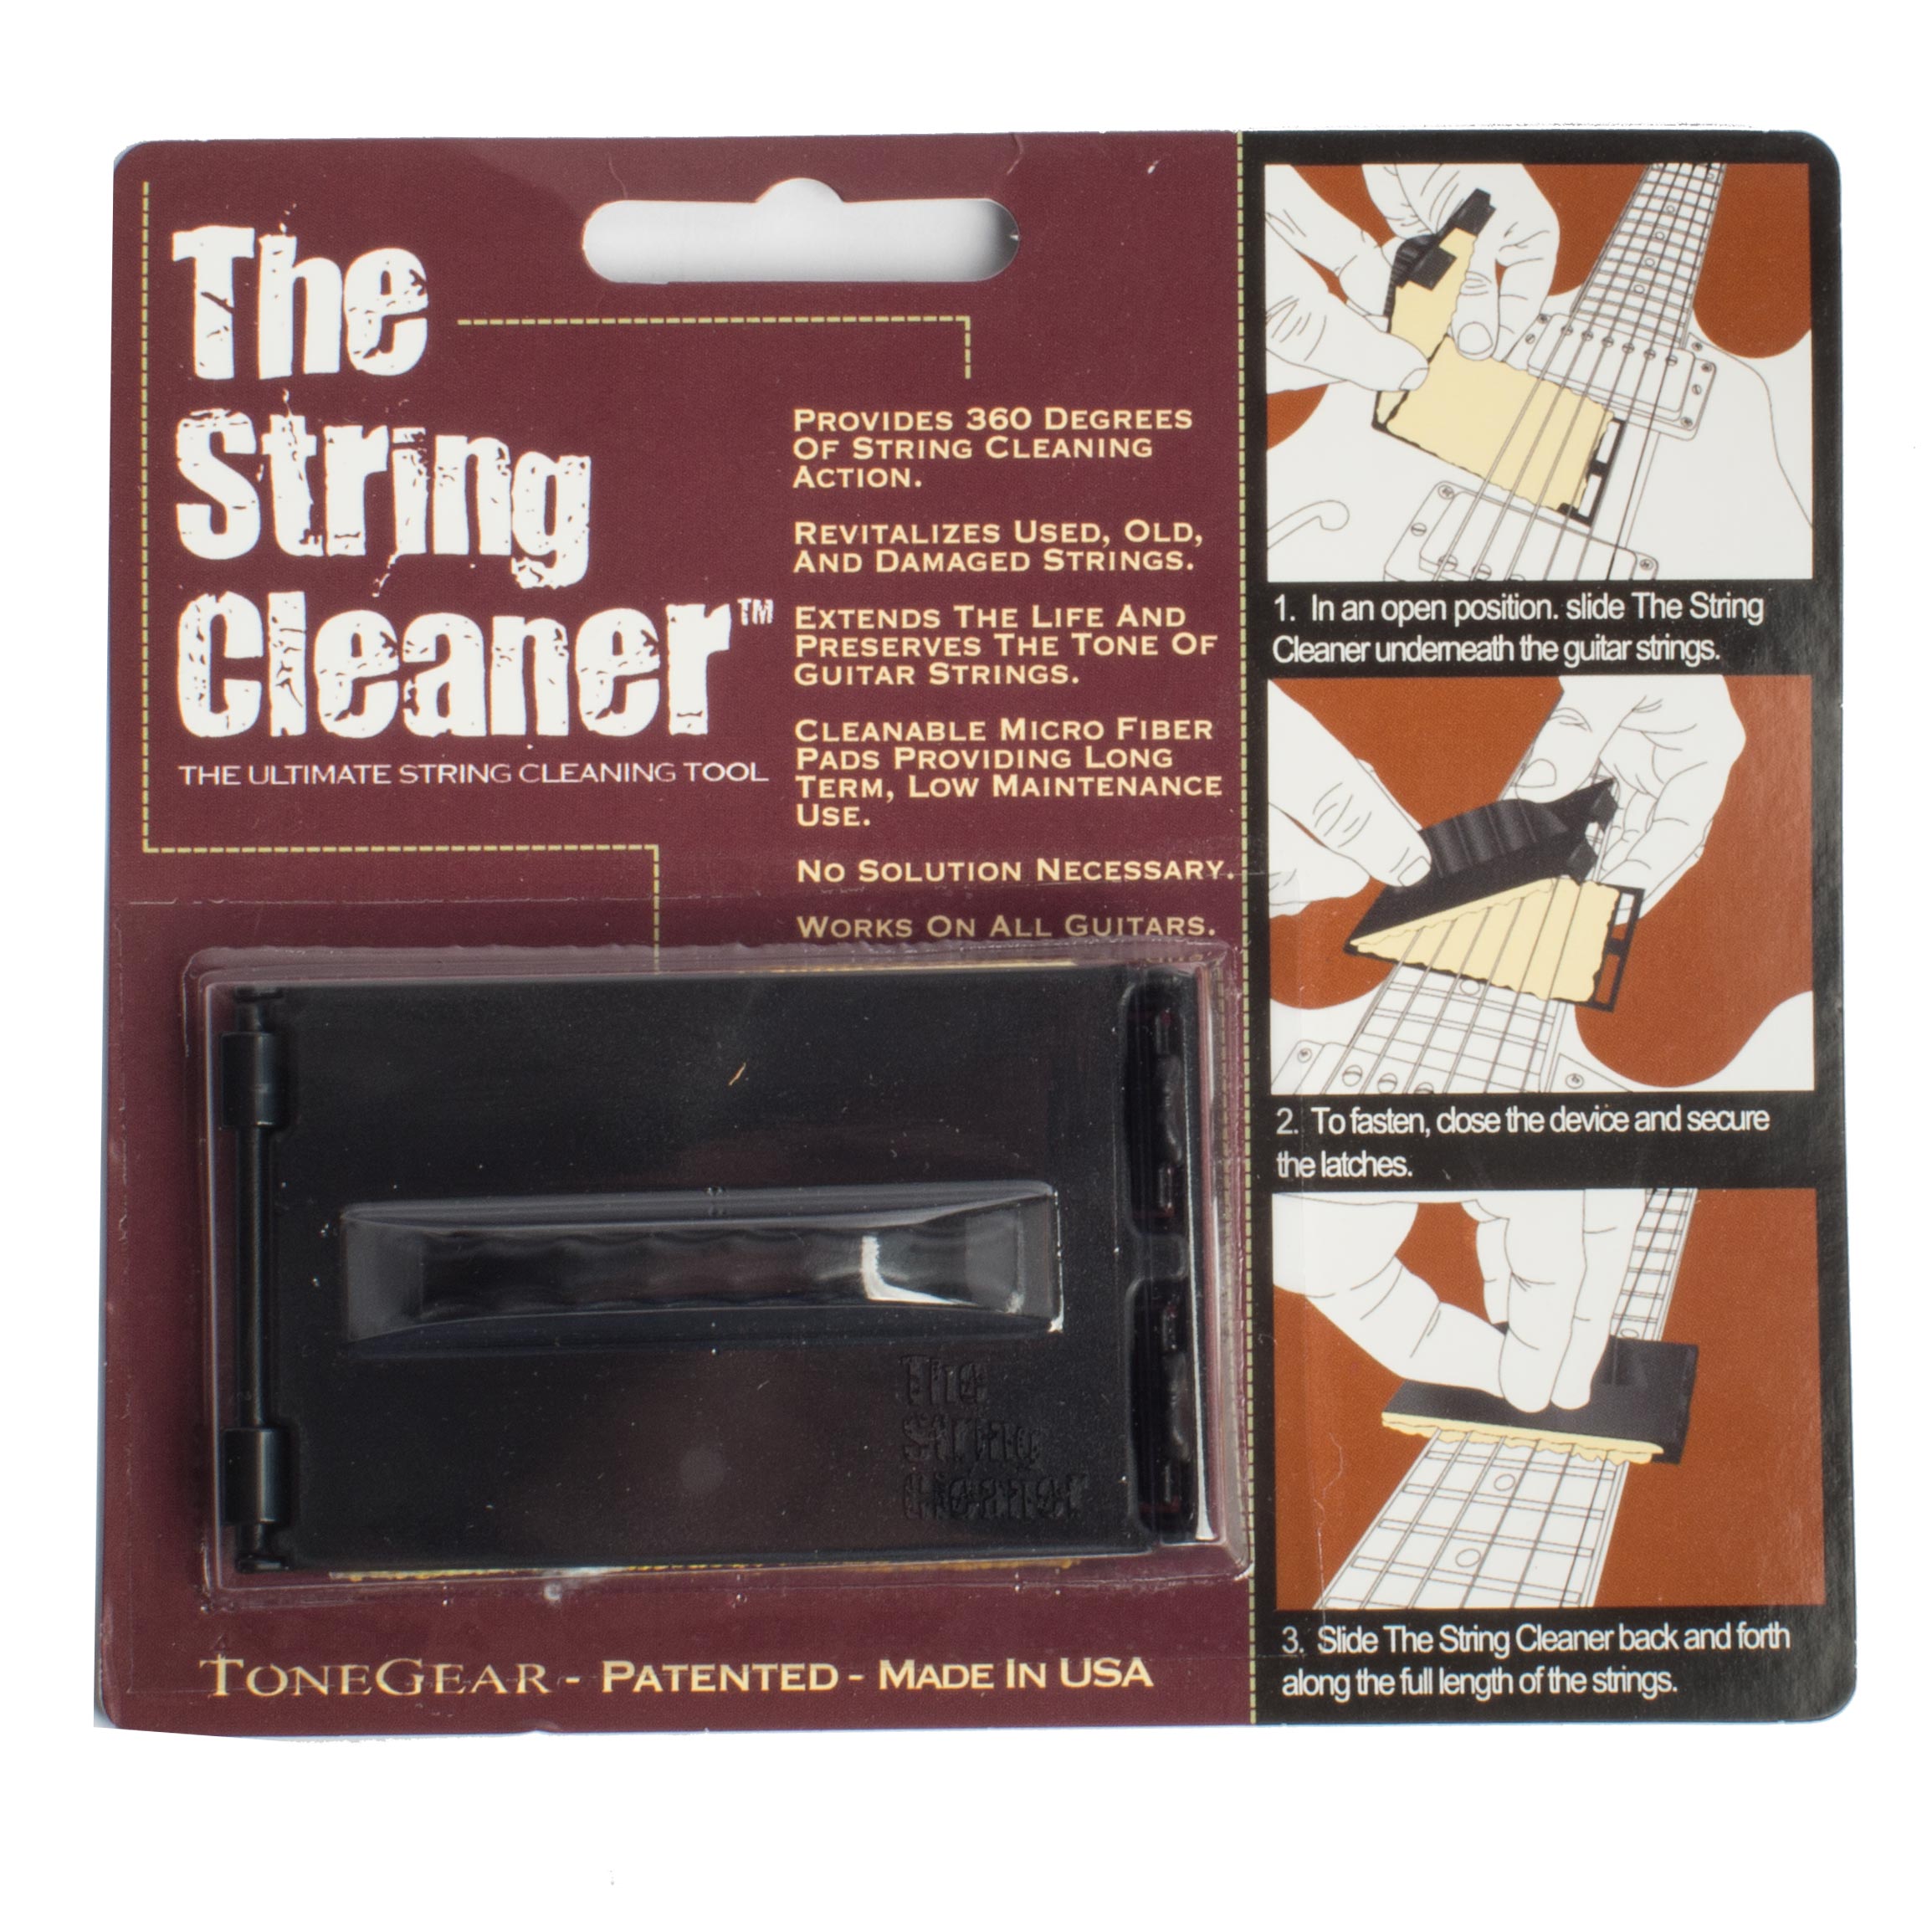 TraderPlus 2Pcs Guitar String Cleaner Clean Fretboard Cloth Tool for Violin/Bass/Ukulele/Electric Guitars and Other Musical Instrument 